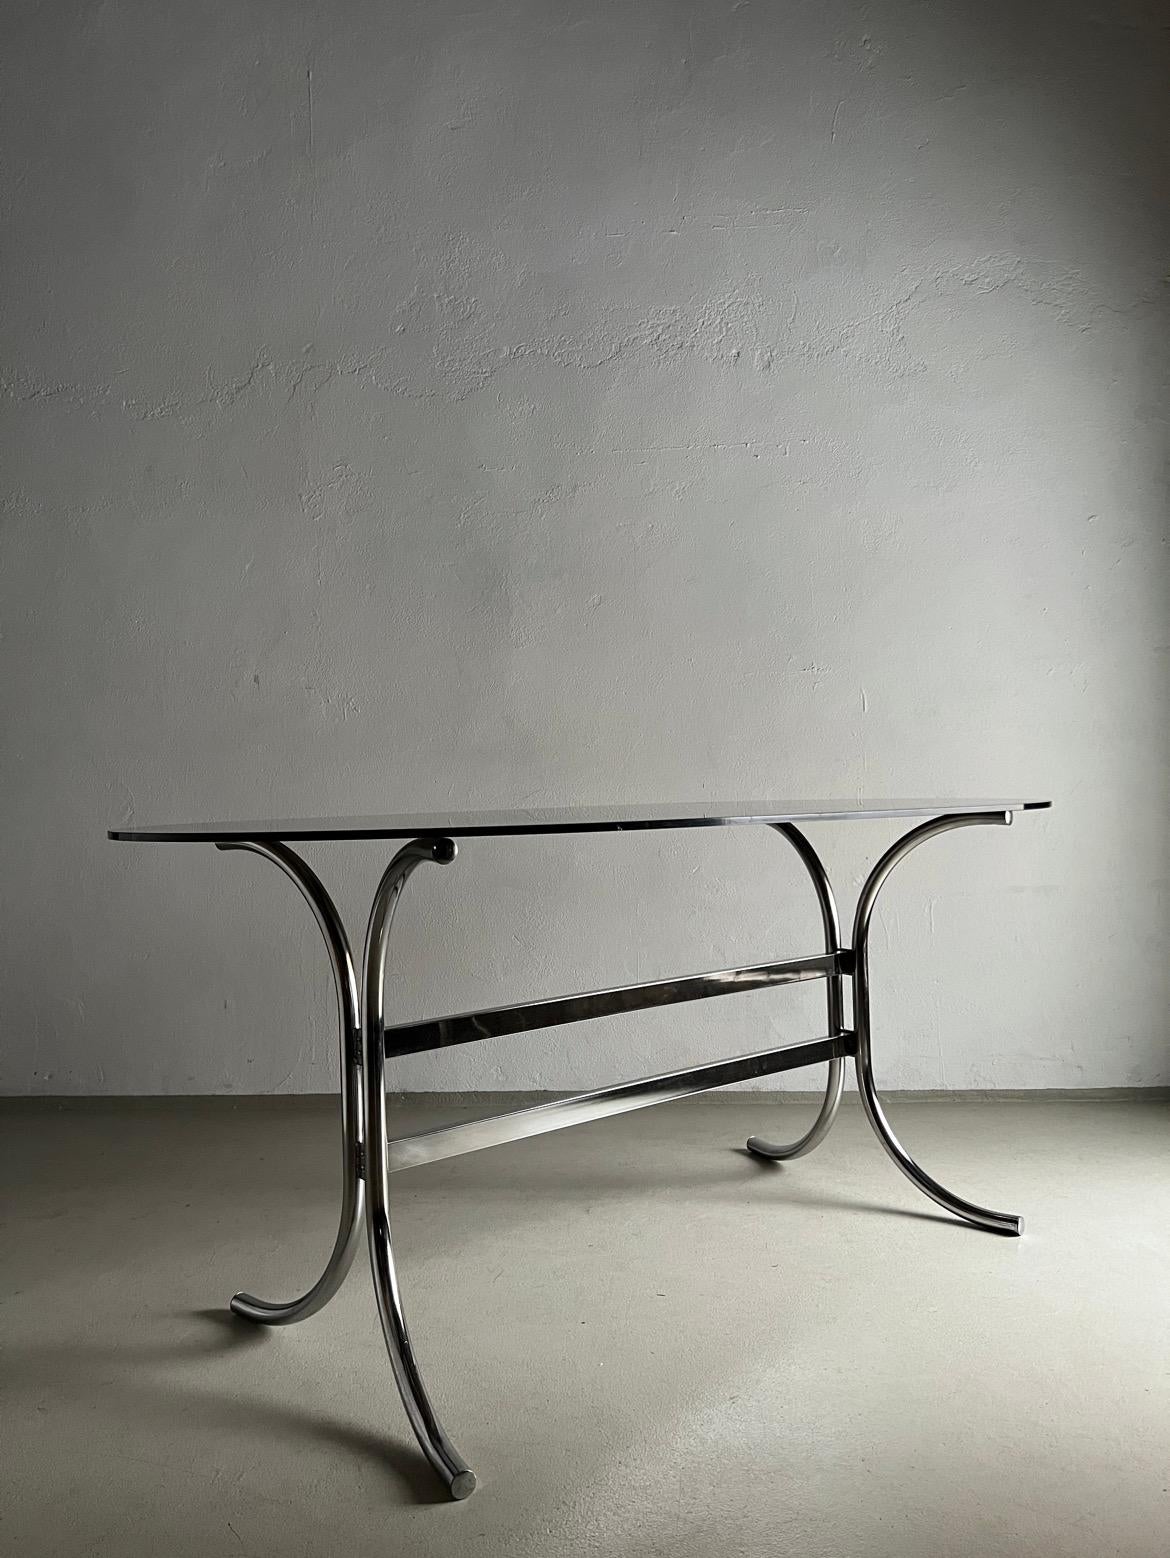 Vintage dining table with chrome base and smoked glass tabletop. My shipping option for the US includes only delivery of the metal base without the glass tabletop. For the Continental EU and UK - full set.

Additional information:
Country of